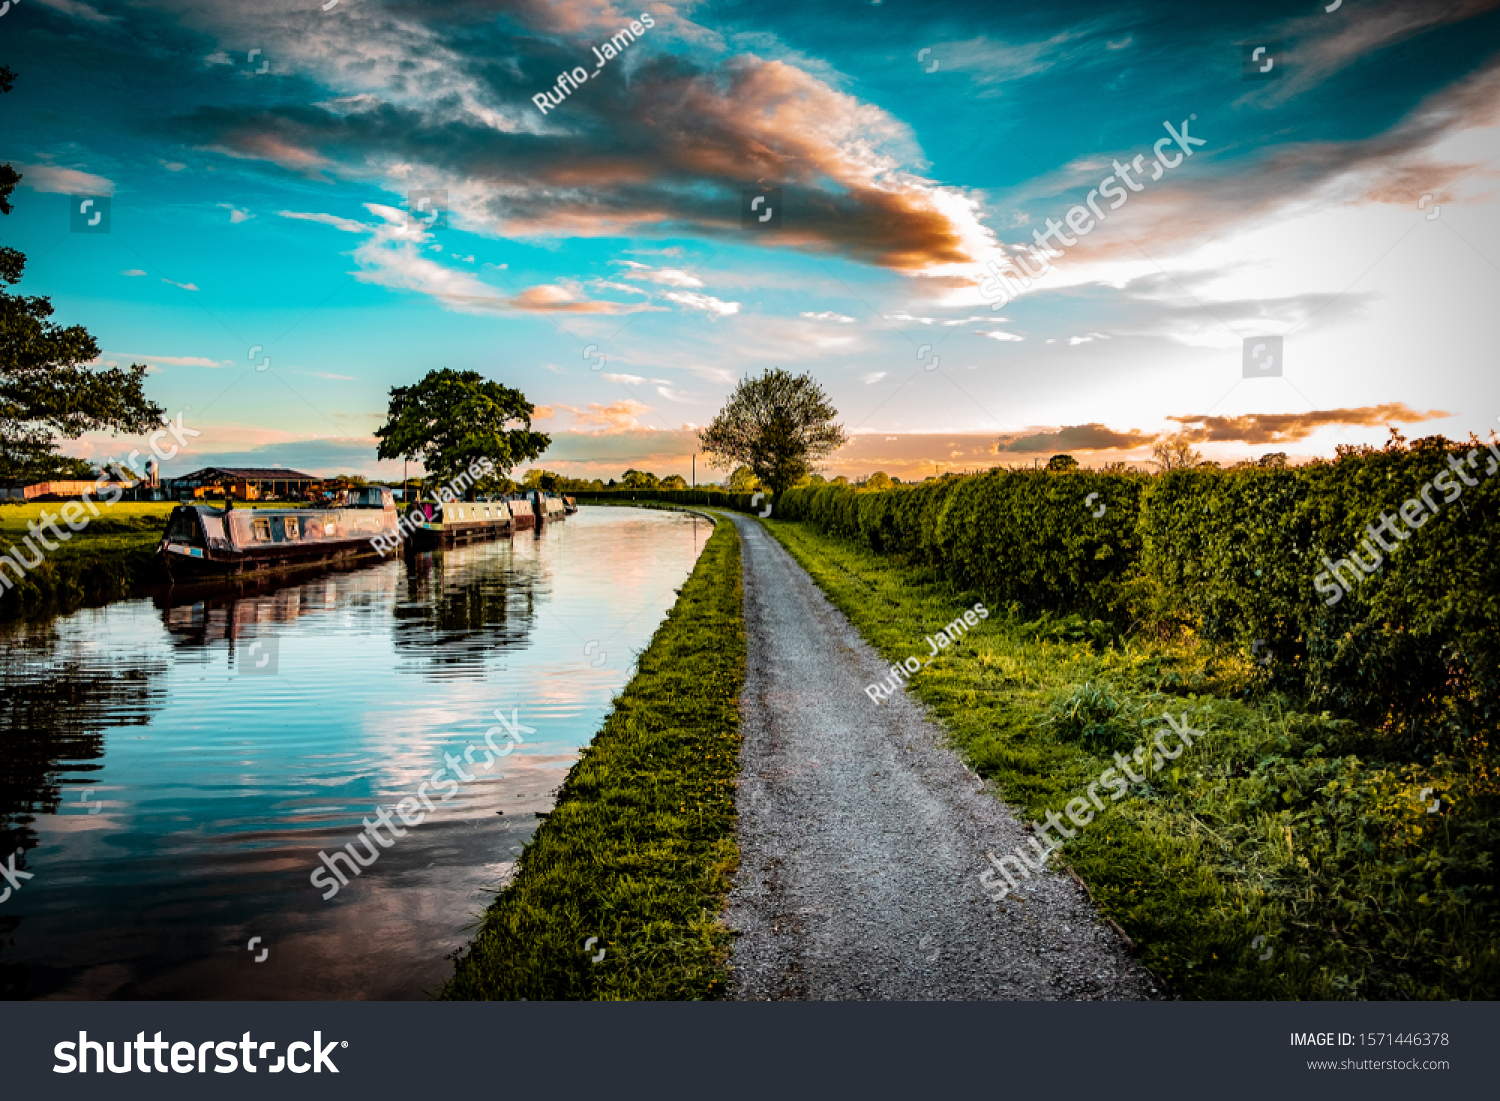 Cheshire Countryside Canal scene, with barges, trees and farm fields set in the Uk summertime at sunset. #1571446378